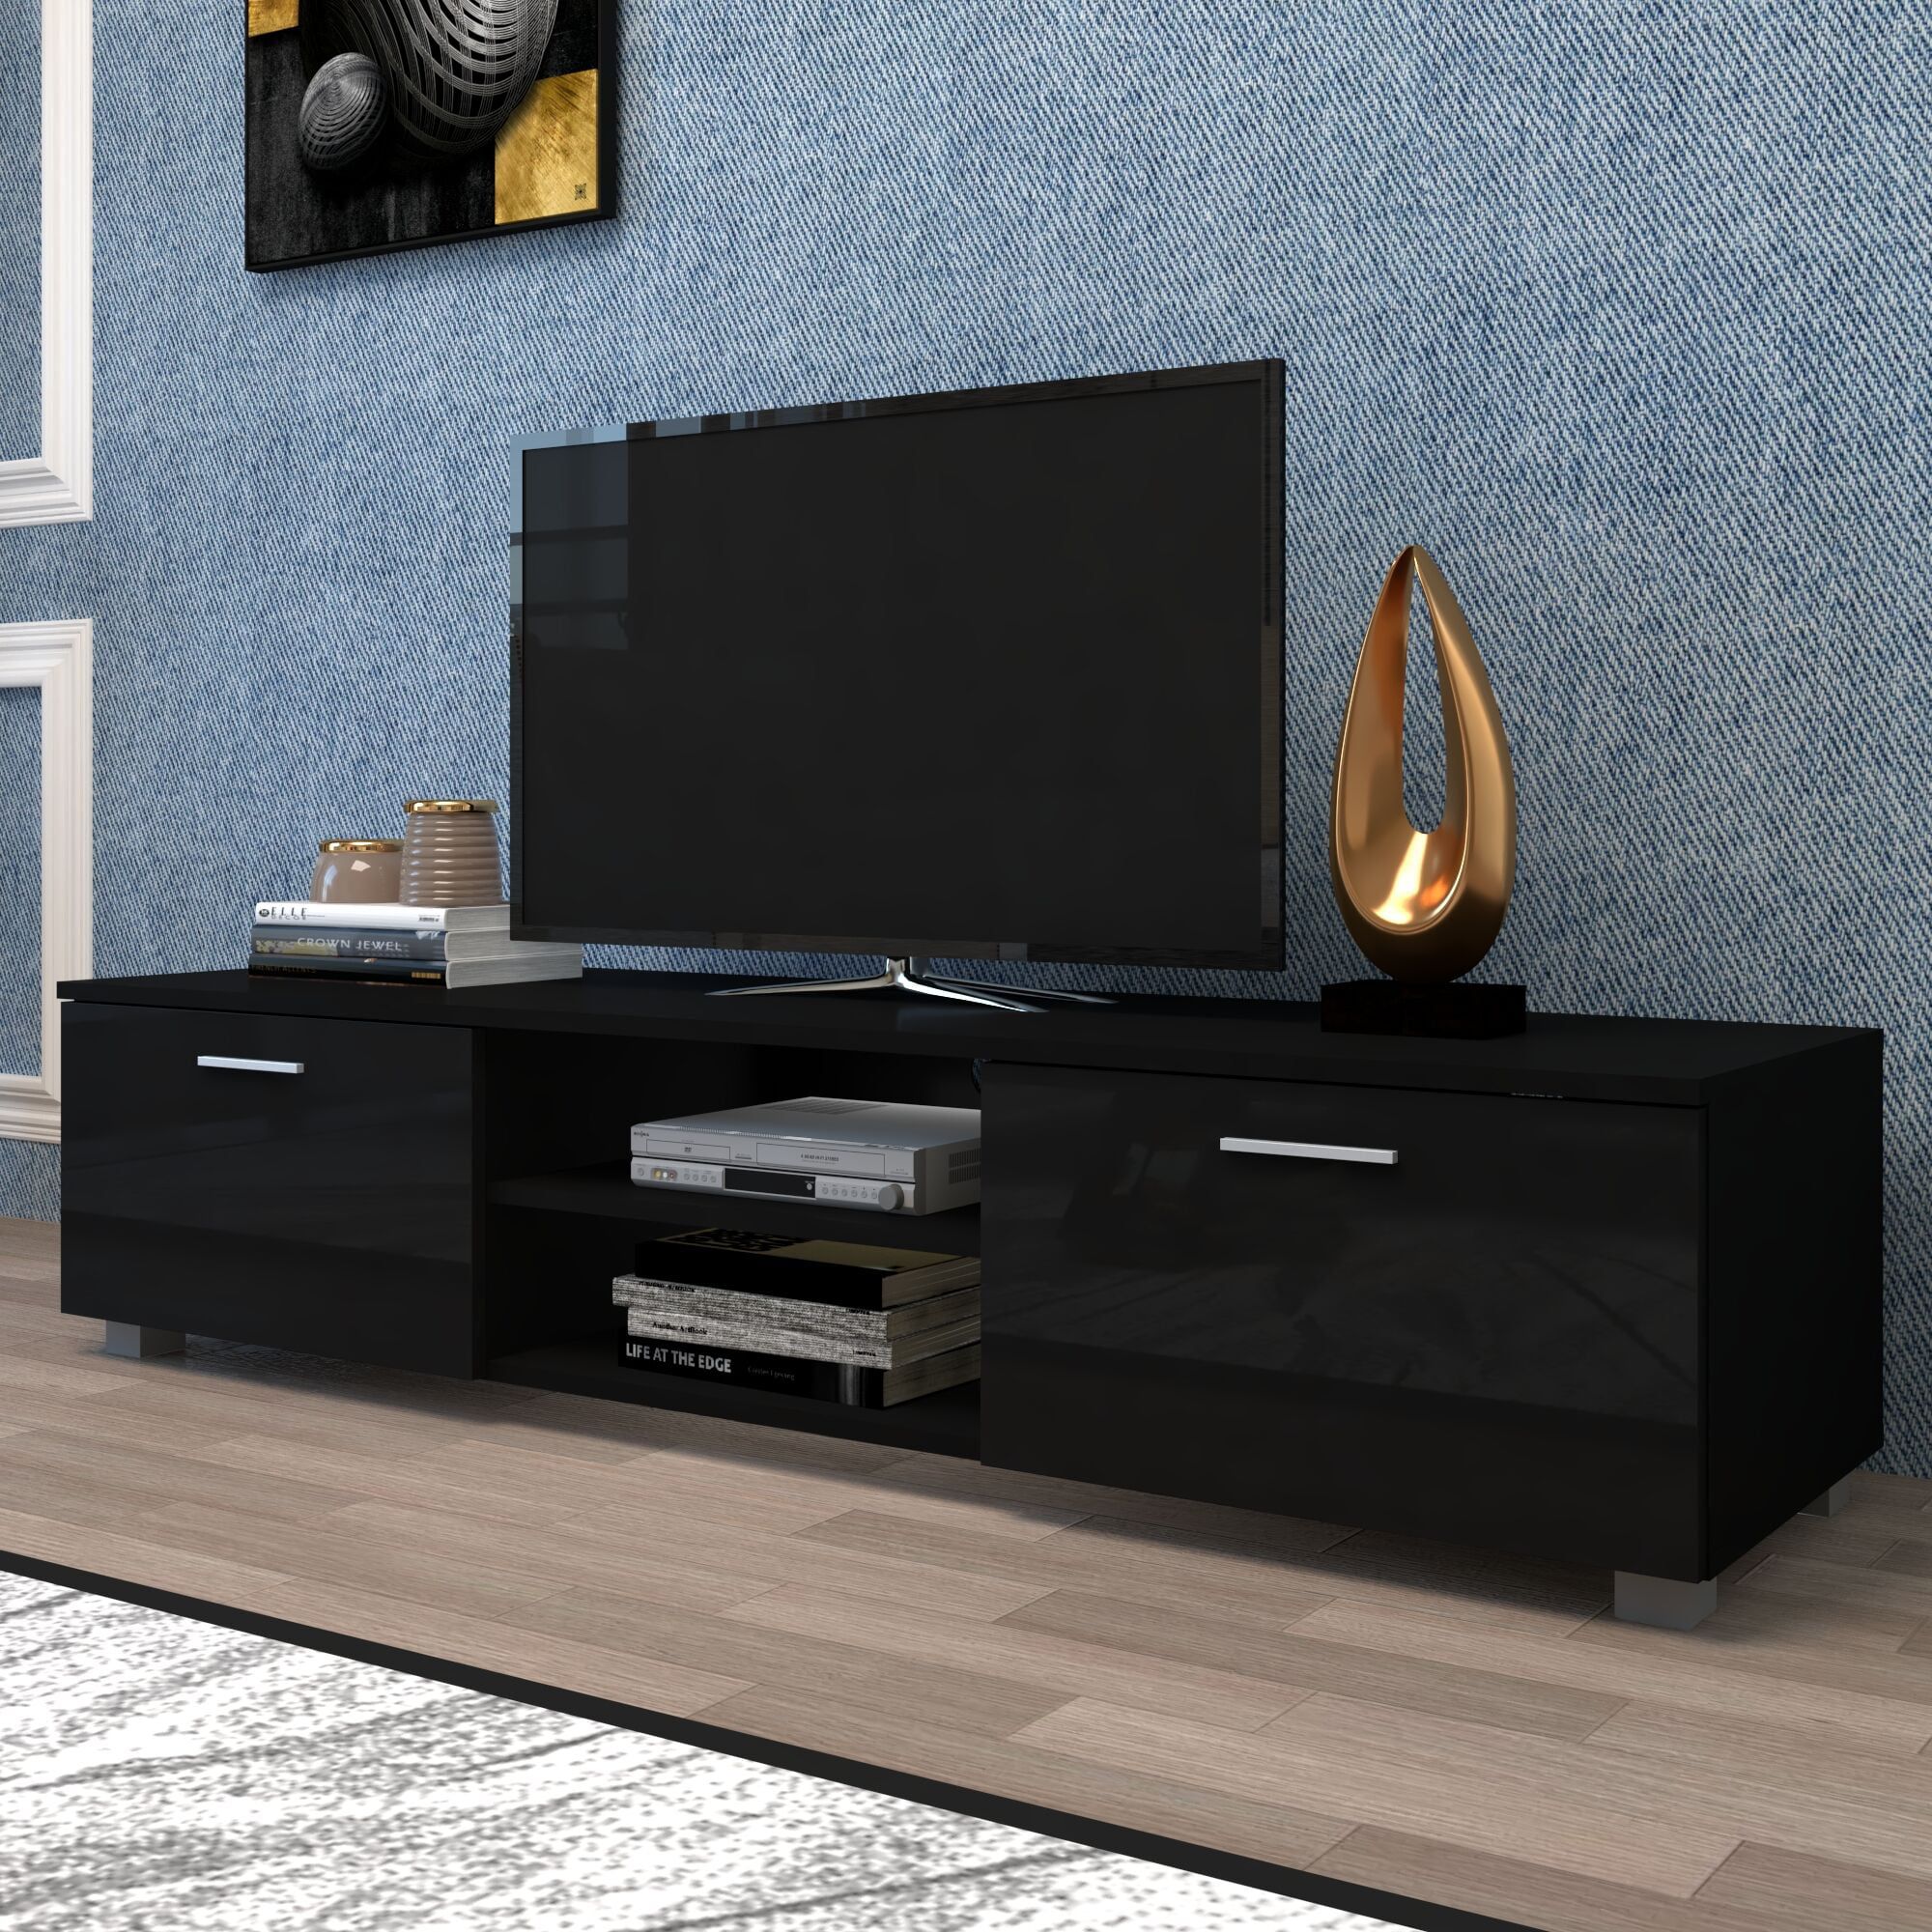 Black Modern Tv Stand For 70 Inch Tv Stands, Media Console Inside Media Entertainment Center Tv Stands (View 7 of 20)